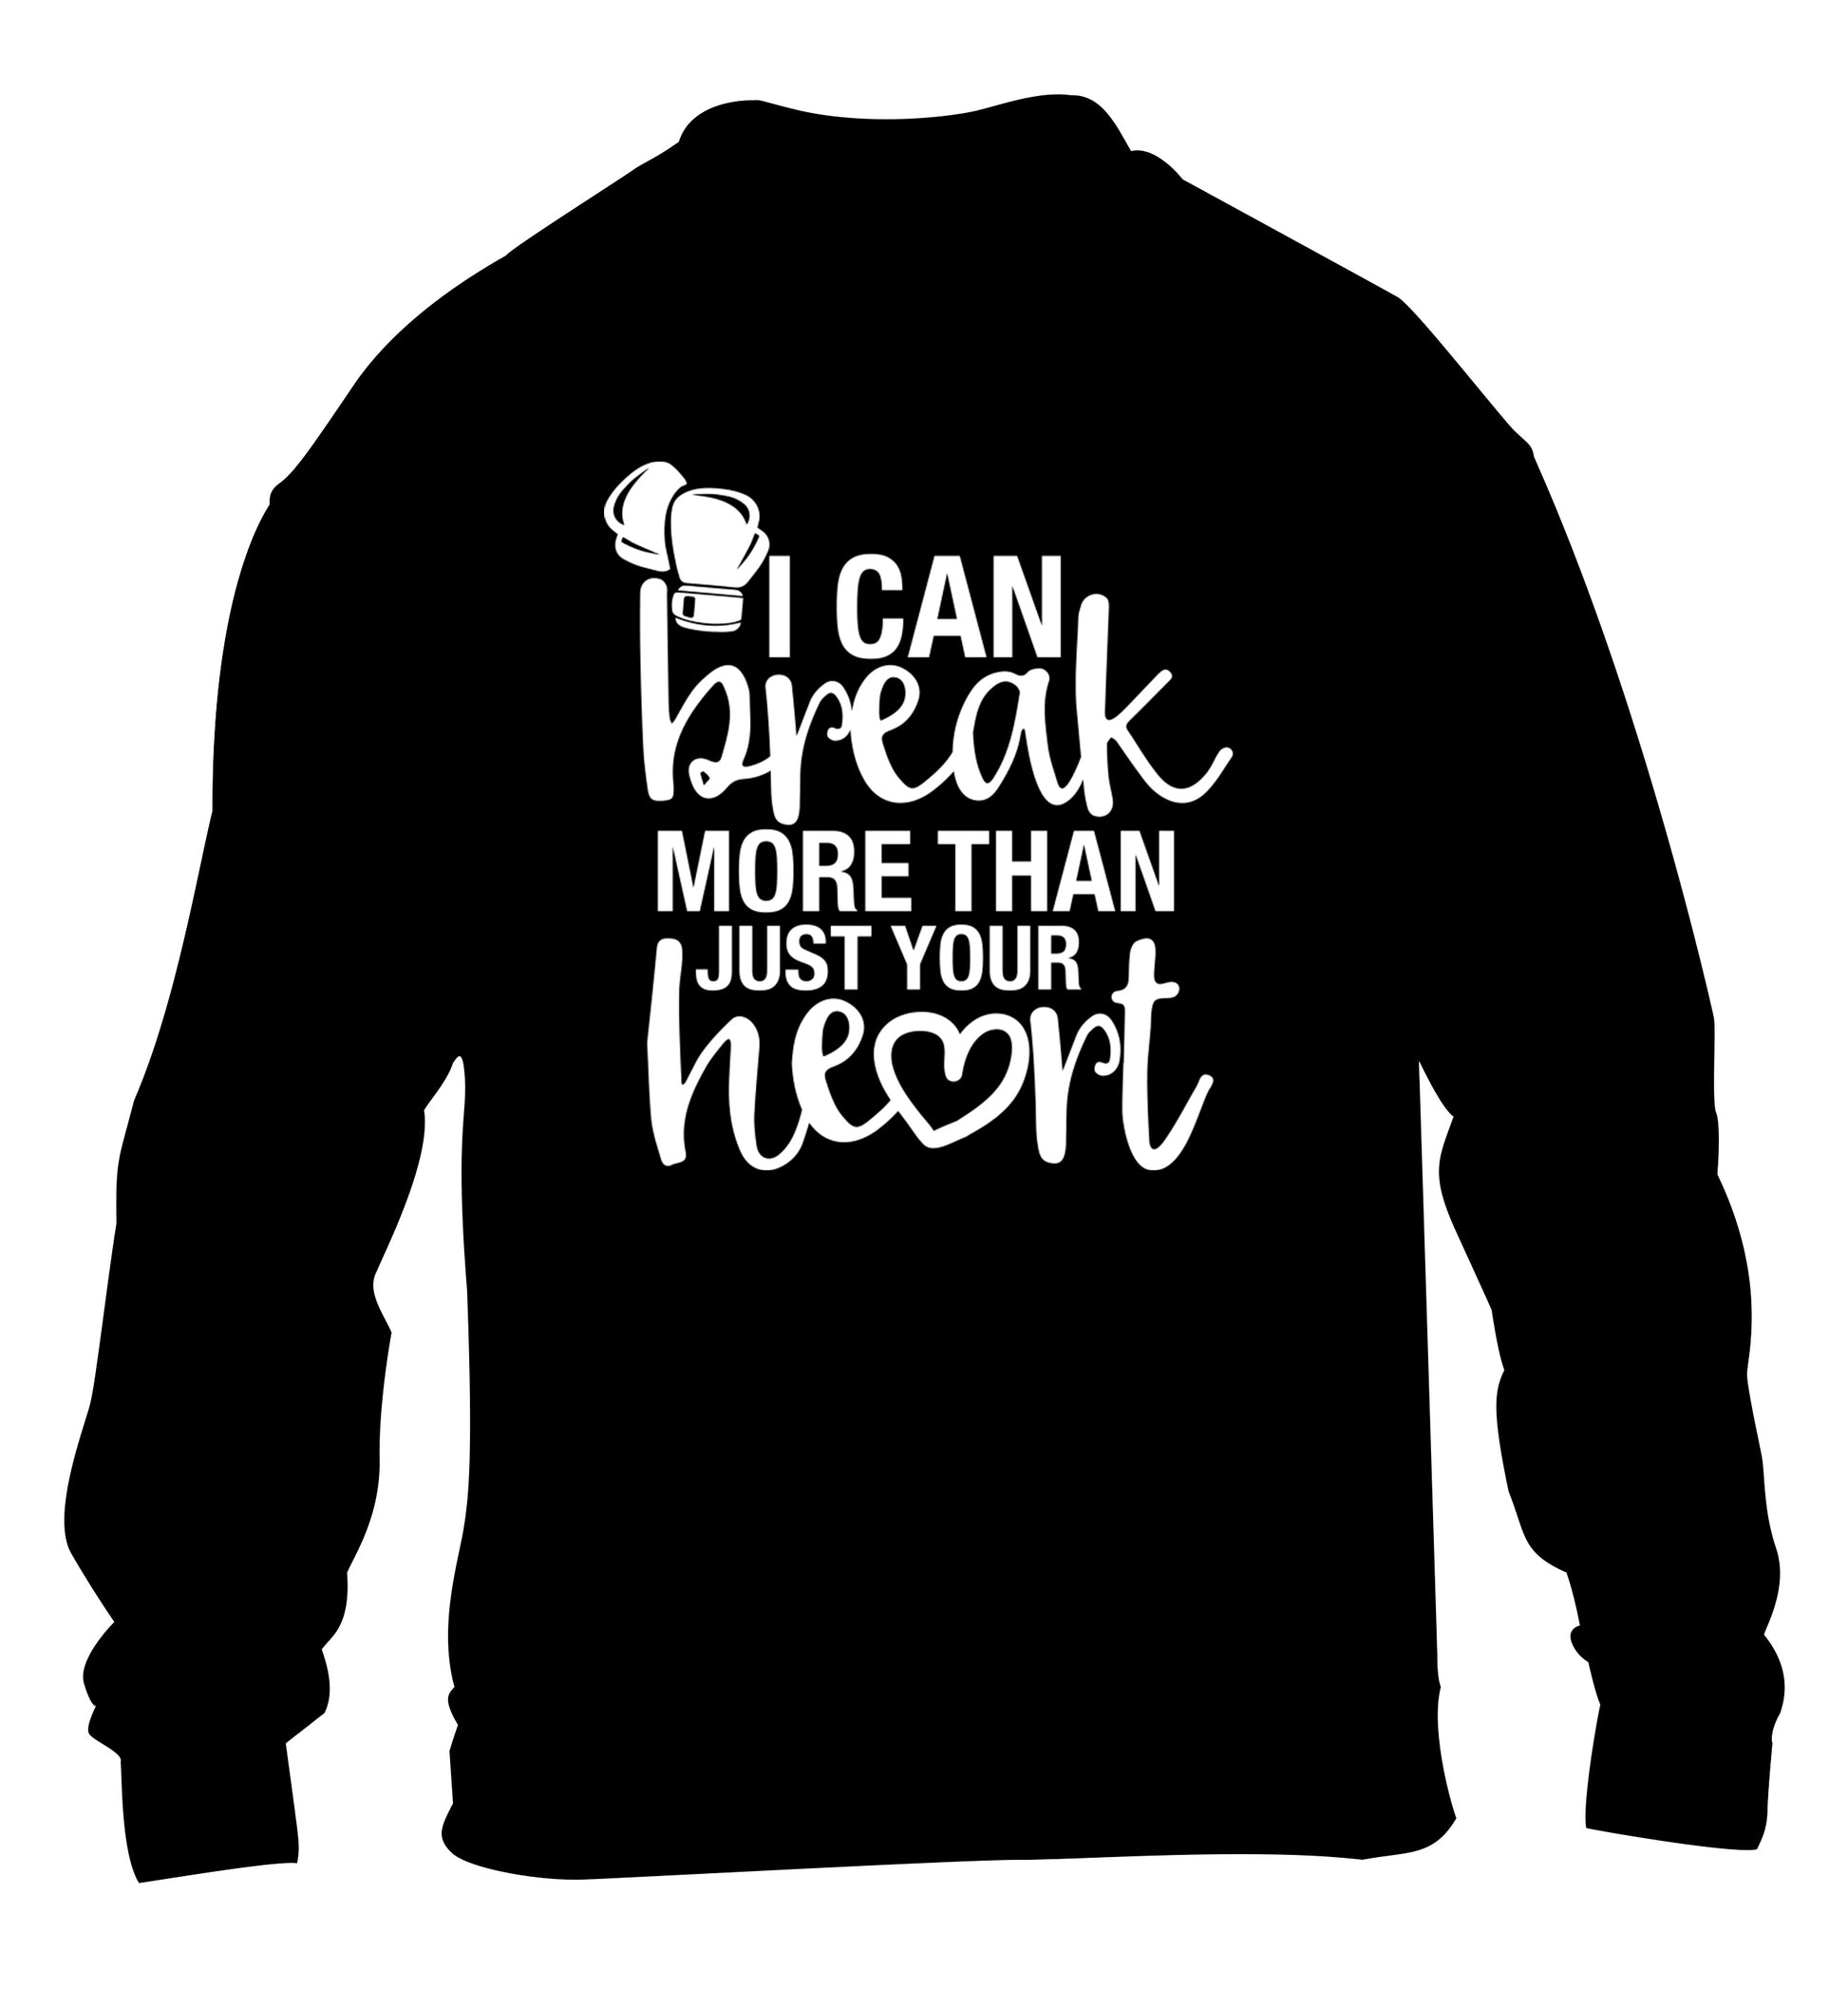 I can break more than just your heart children's black sweater 12-13 Years